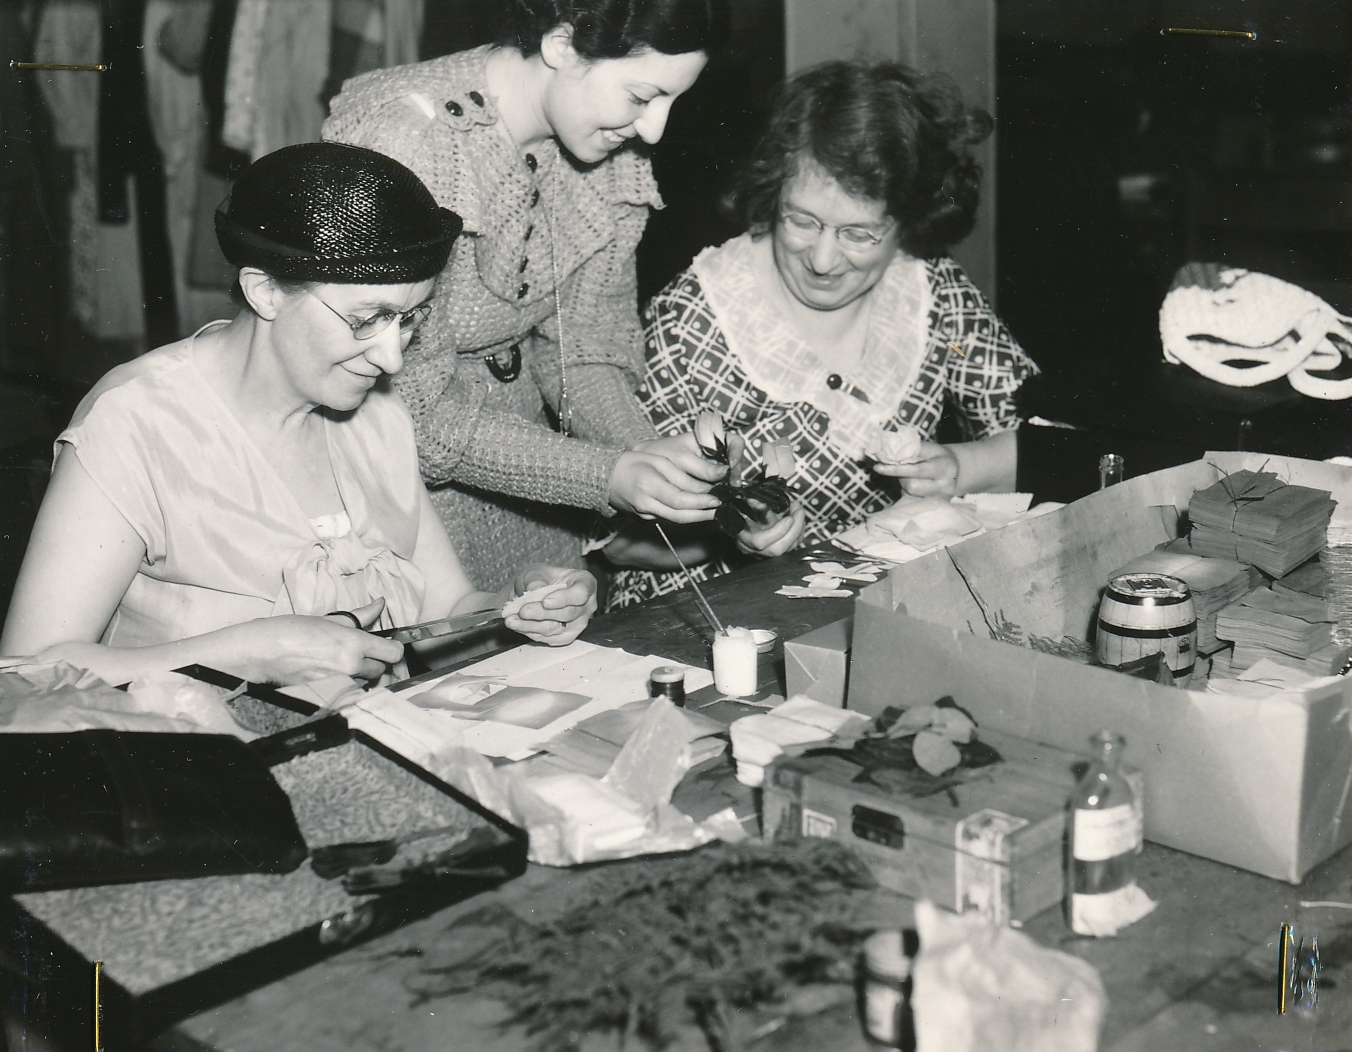 Learning how to make artificial flowers in a WPA handicraft class in Buffalo, New York. Photo courtesy of the National Archives (ca. 1936).